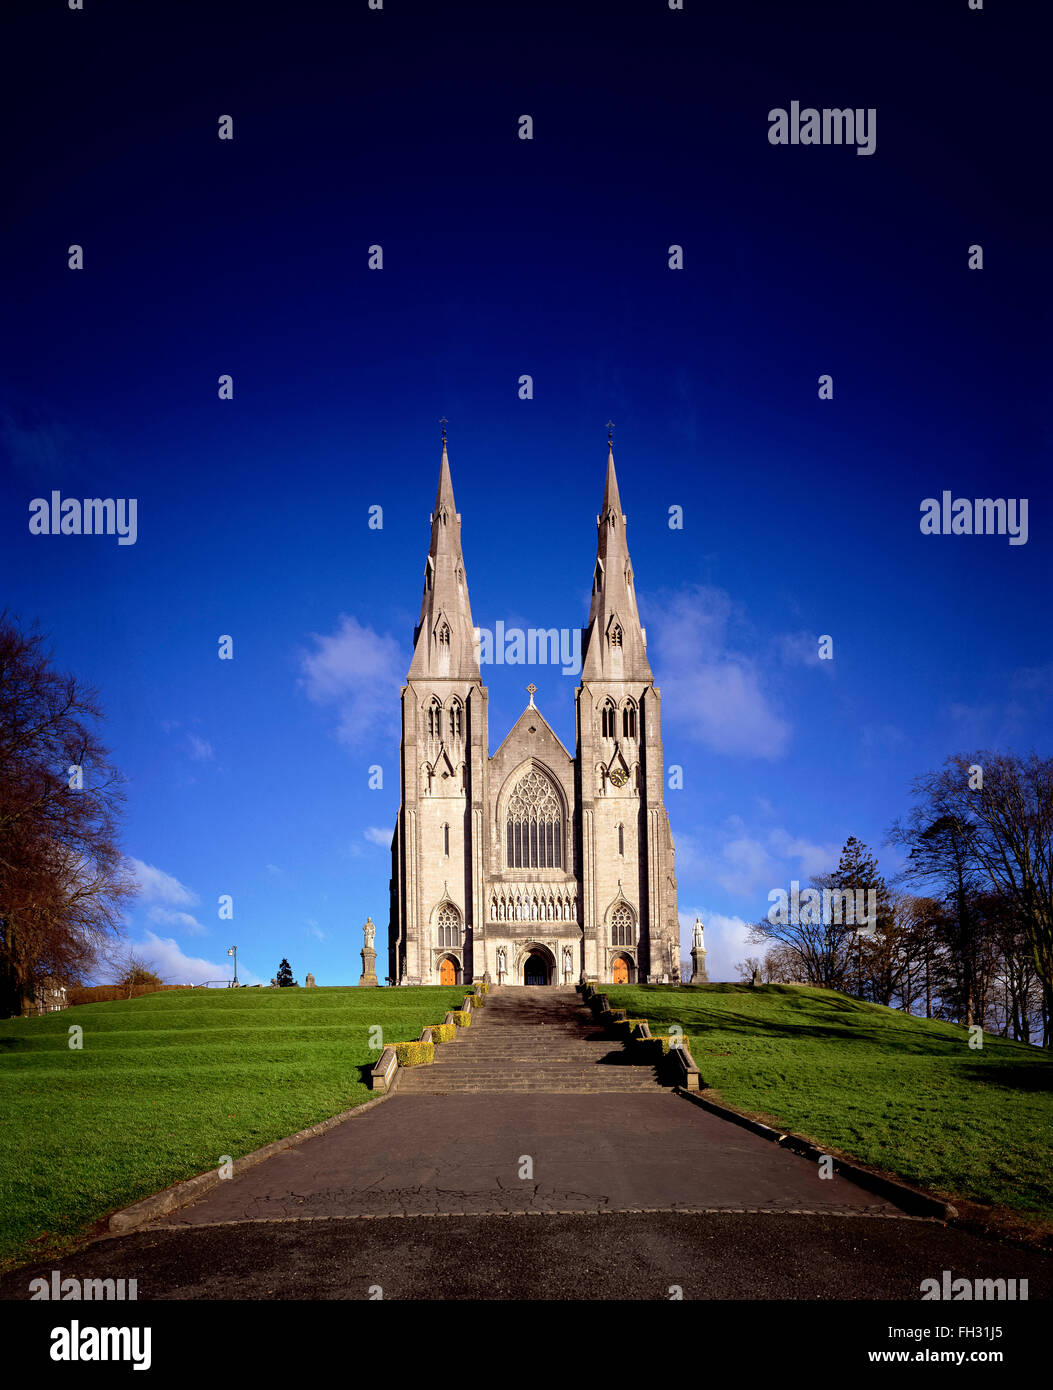 St Patricks RC cathedral Armagh Northern Ireland Foto Stock